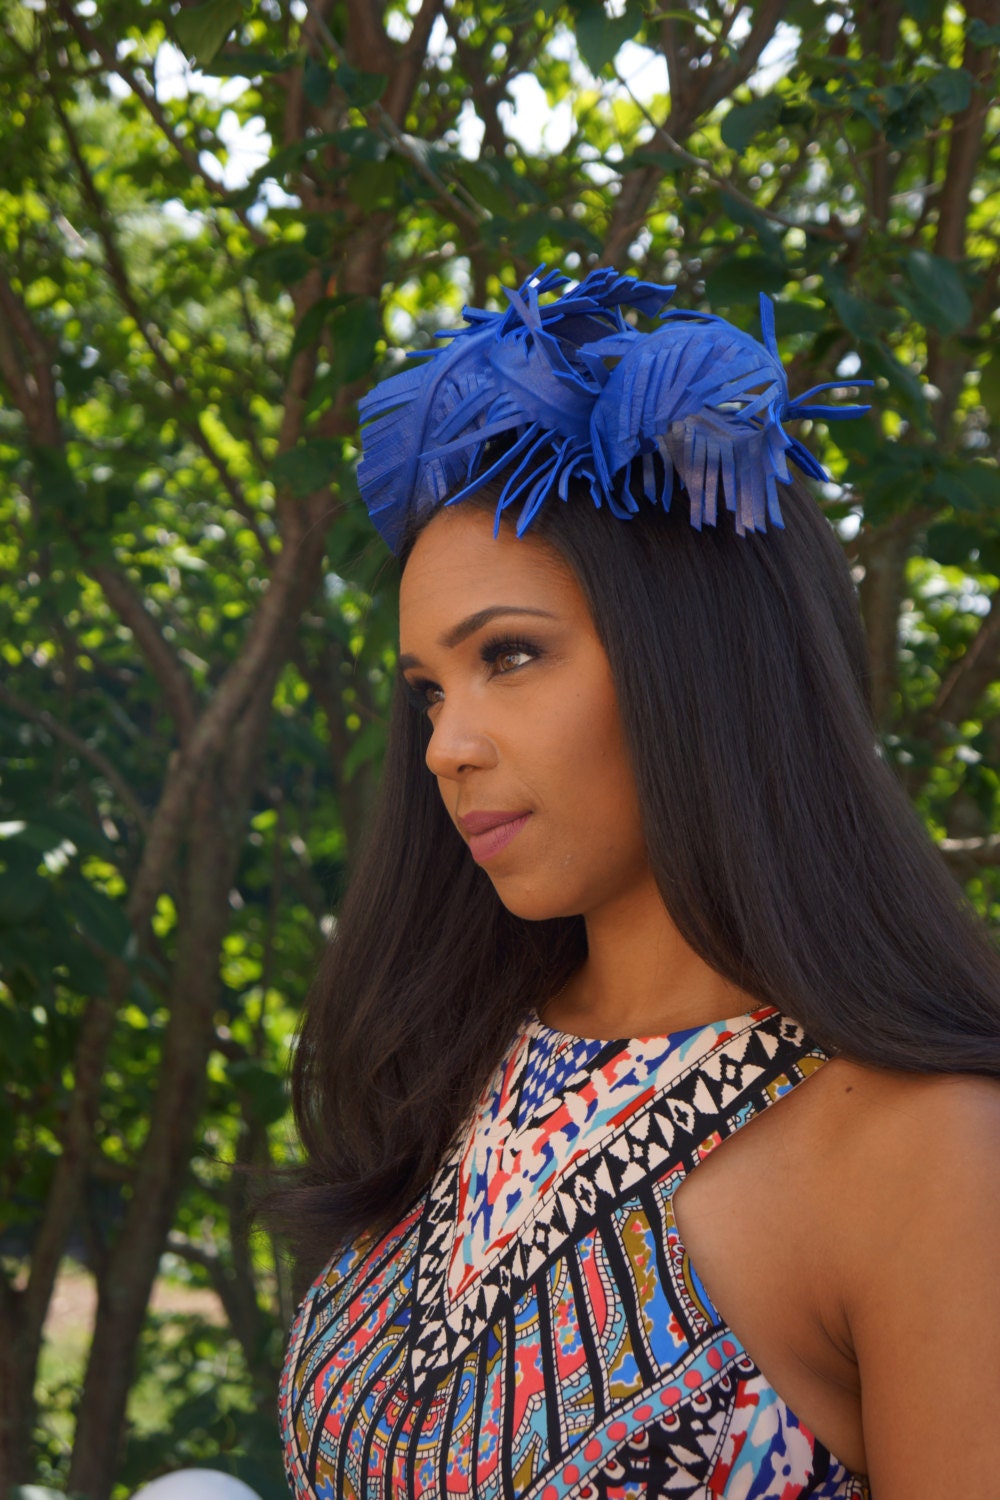 ROYAL BLUE Leather Feather Fascinator. Perfect for ALL Occasions-Weddings-Brides Maids-Proms-Races-Parties-Teens-Holidays-Polo Matches-